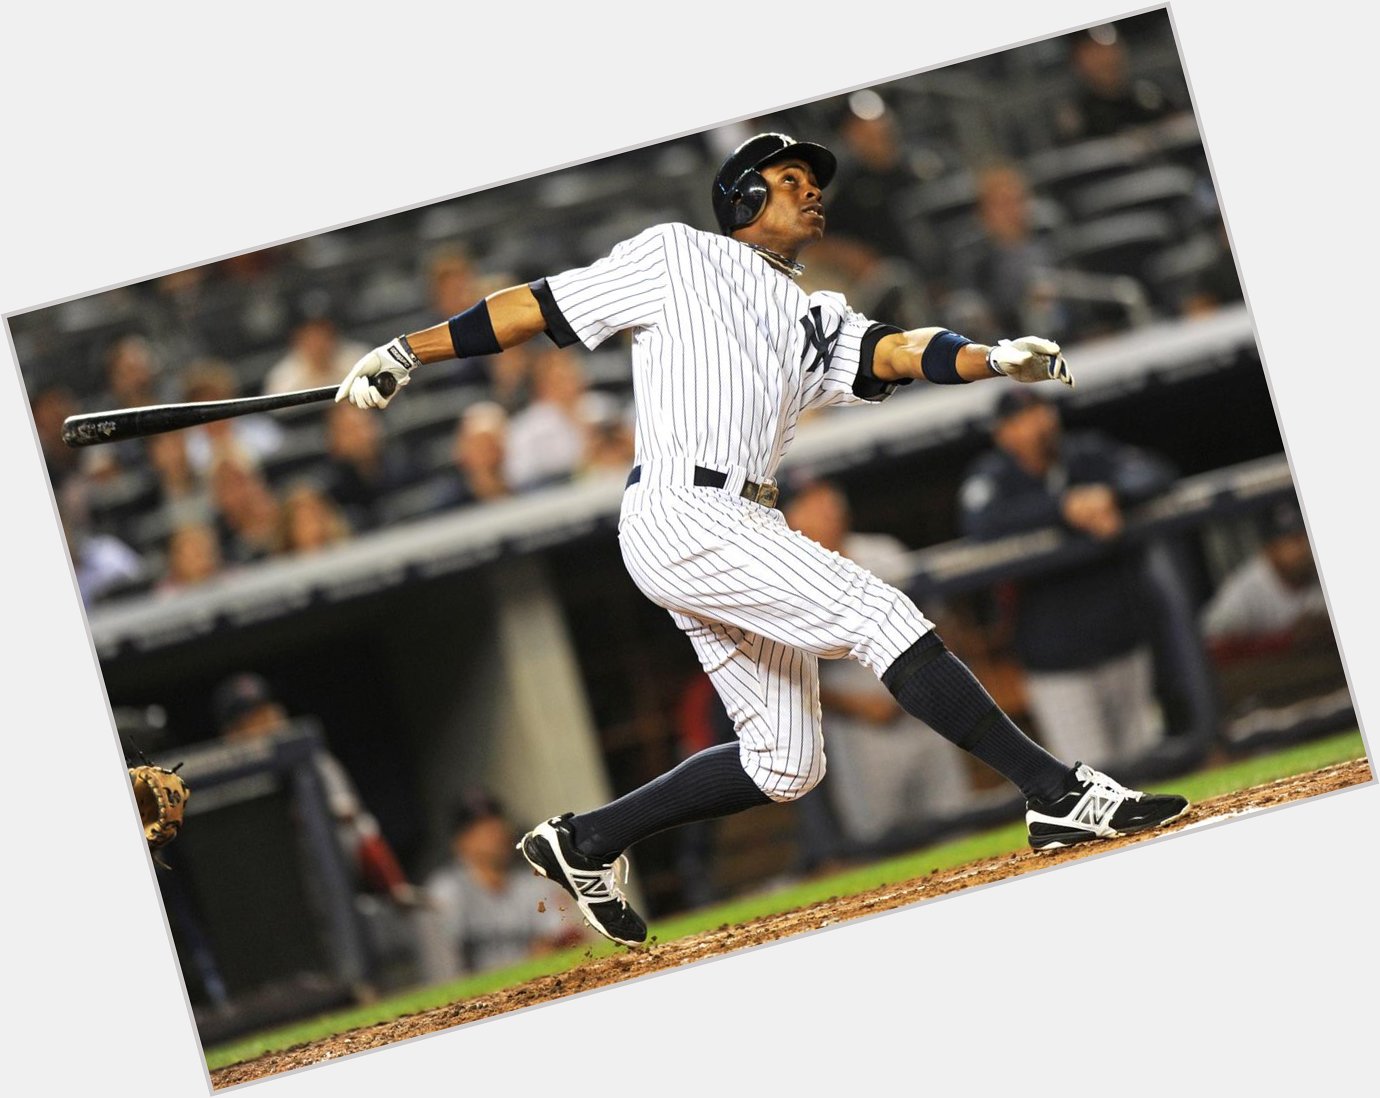 Happy birthday Curtis Granderson! In 2011 & 2012, he hit 84 HRs, drove in 225 runs & scored 238 runs for the Yankees. 